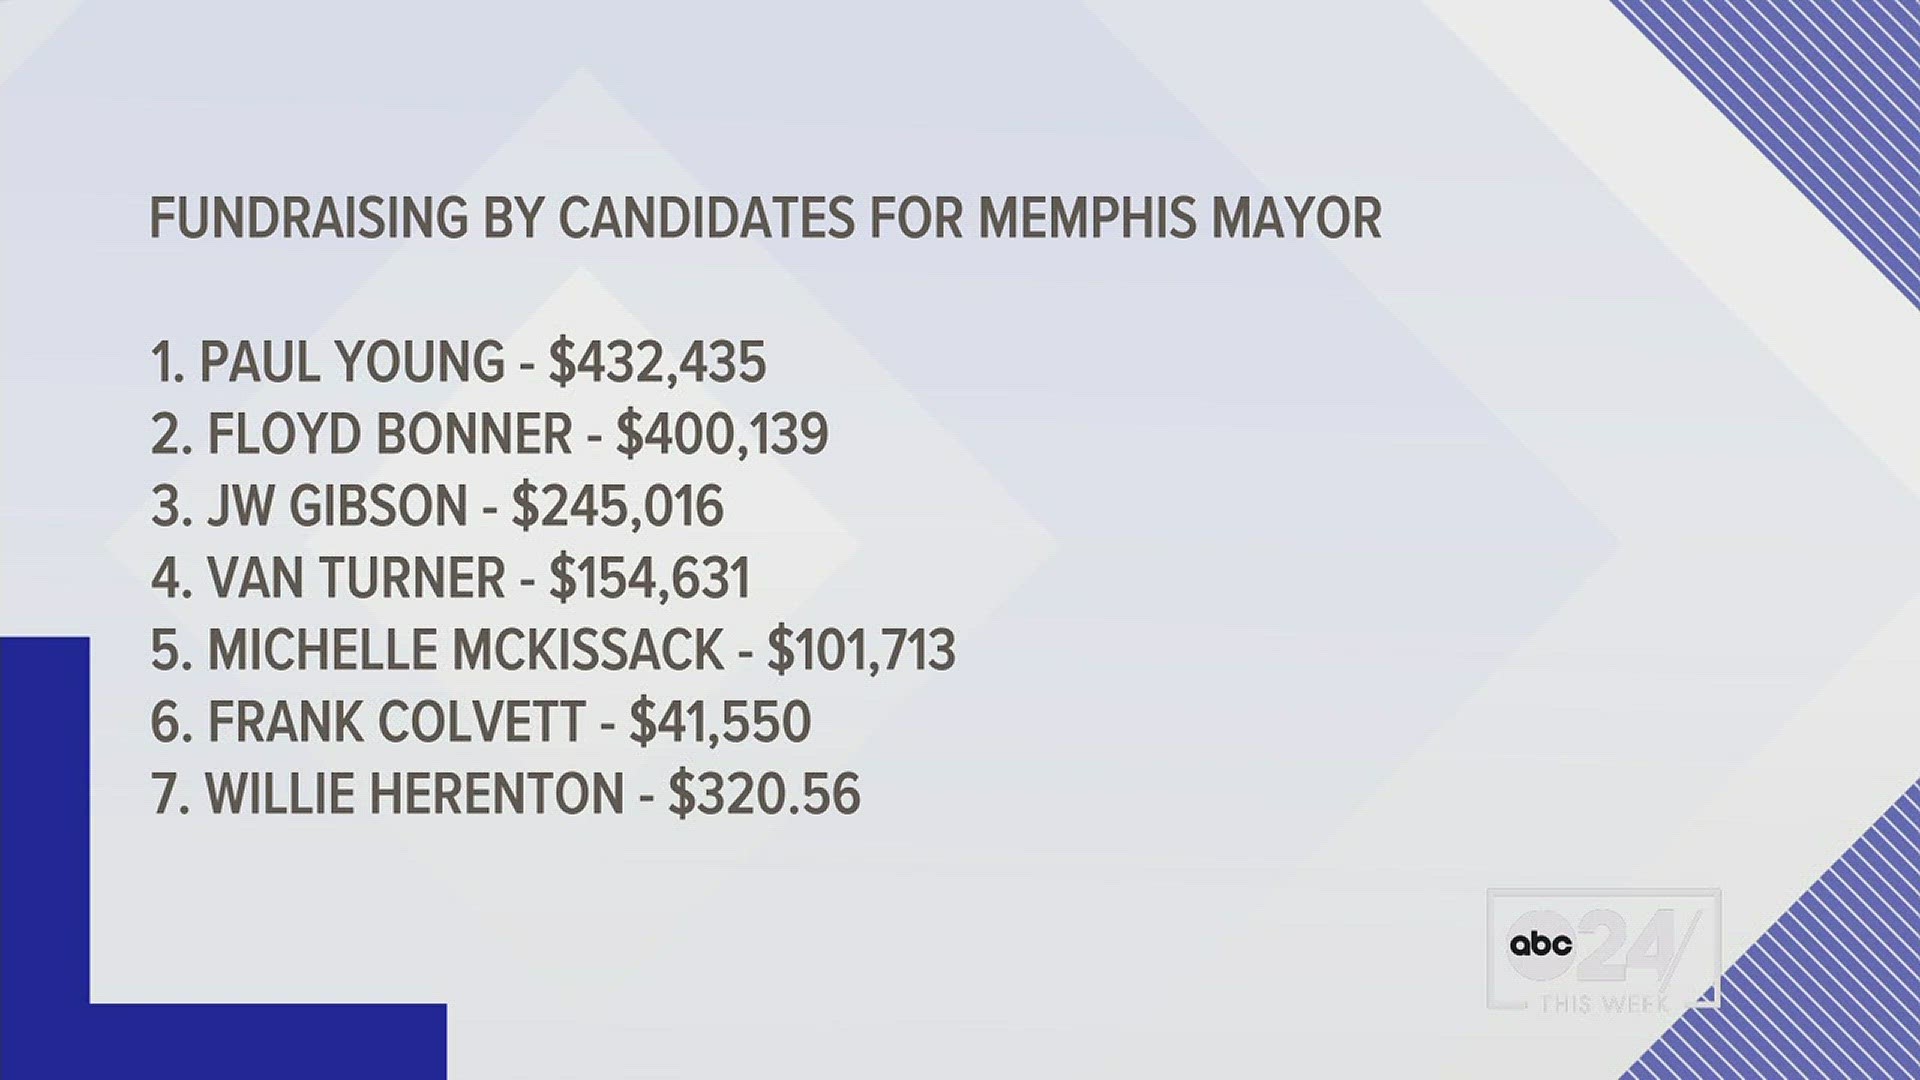 ABC24 political analyst Otis Sanford said that the believes the upcoming Memphis mayoral race is going to come down to "activism by young people."